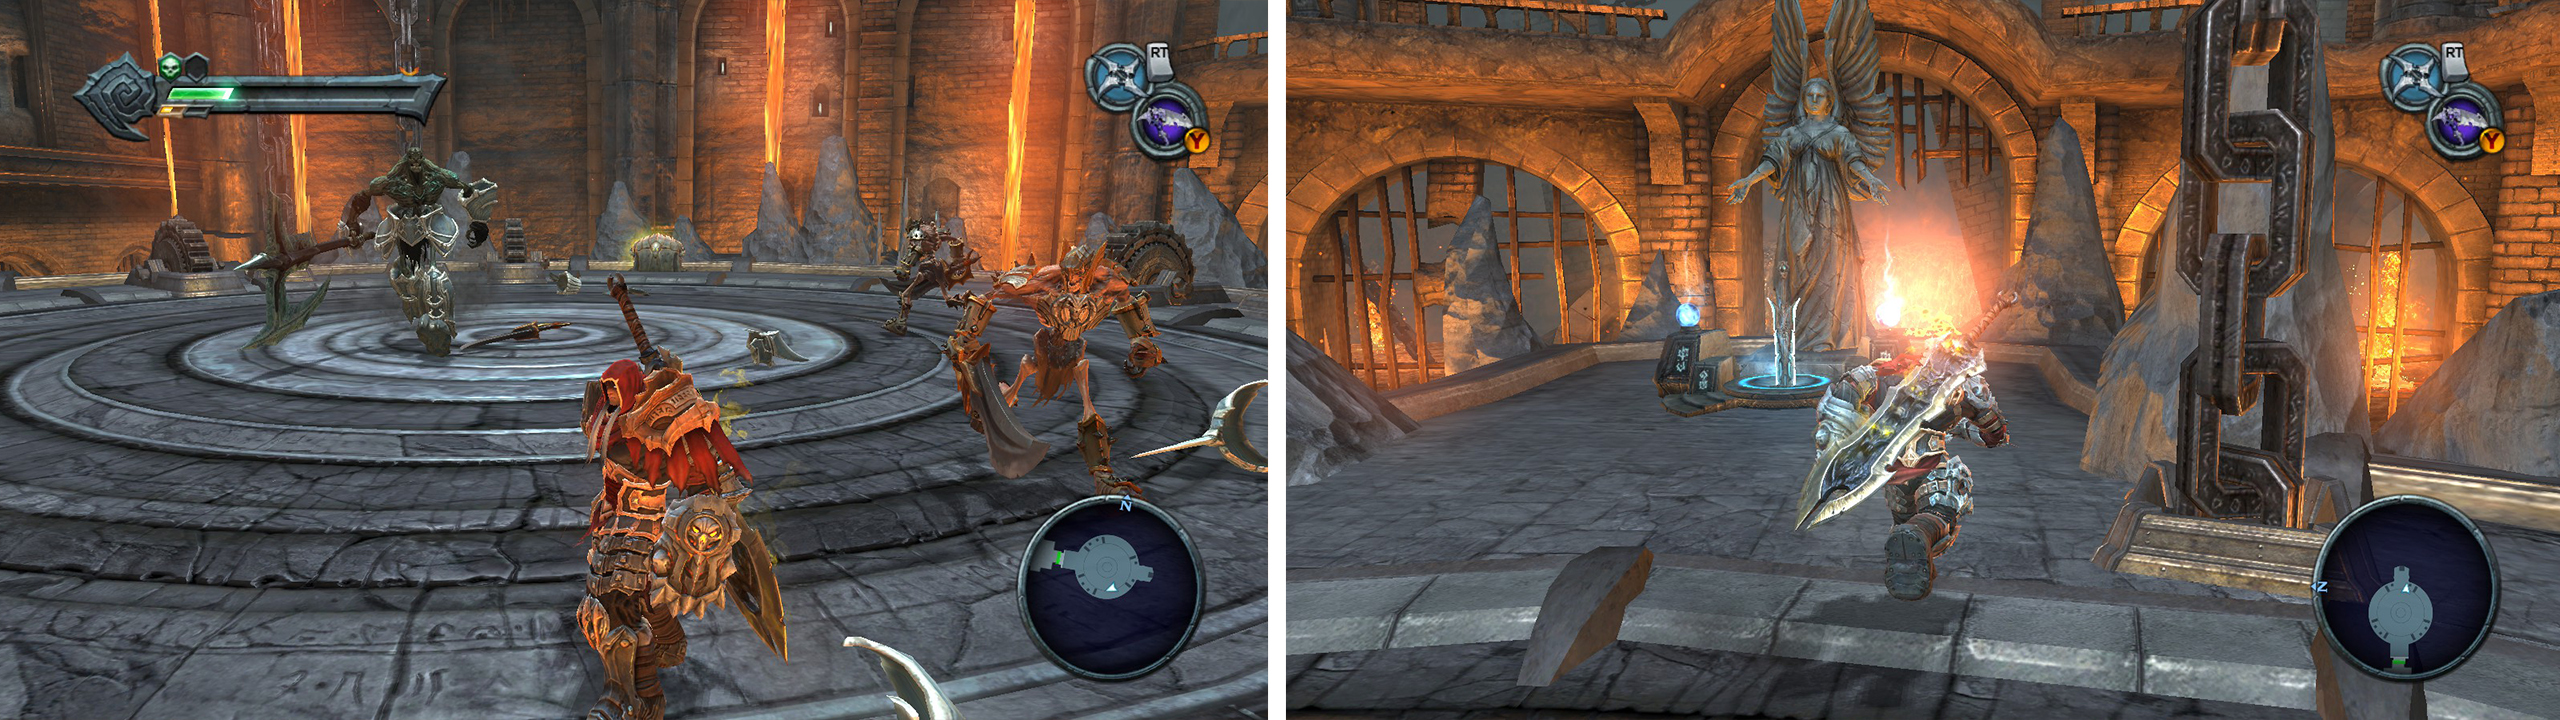 Fight off the waves of enemies (left) to be able to grab the final Crystal Sword (right).